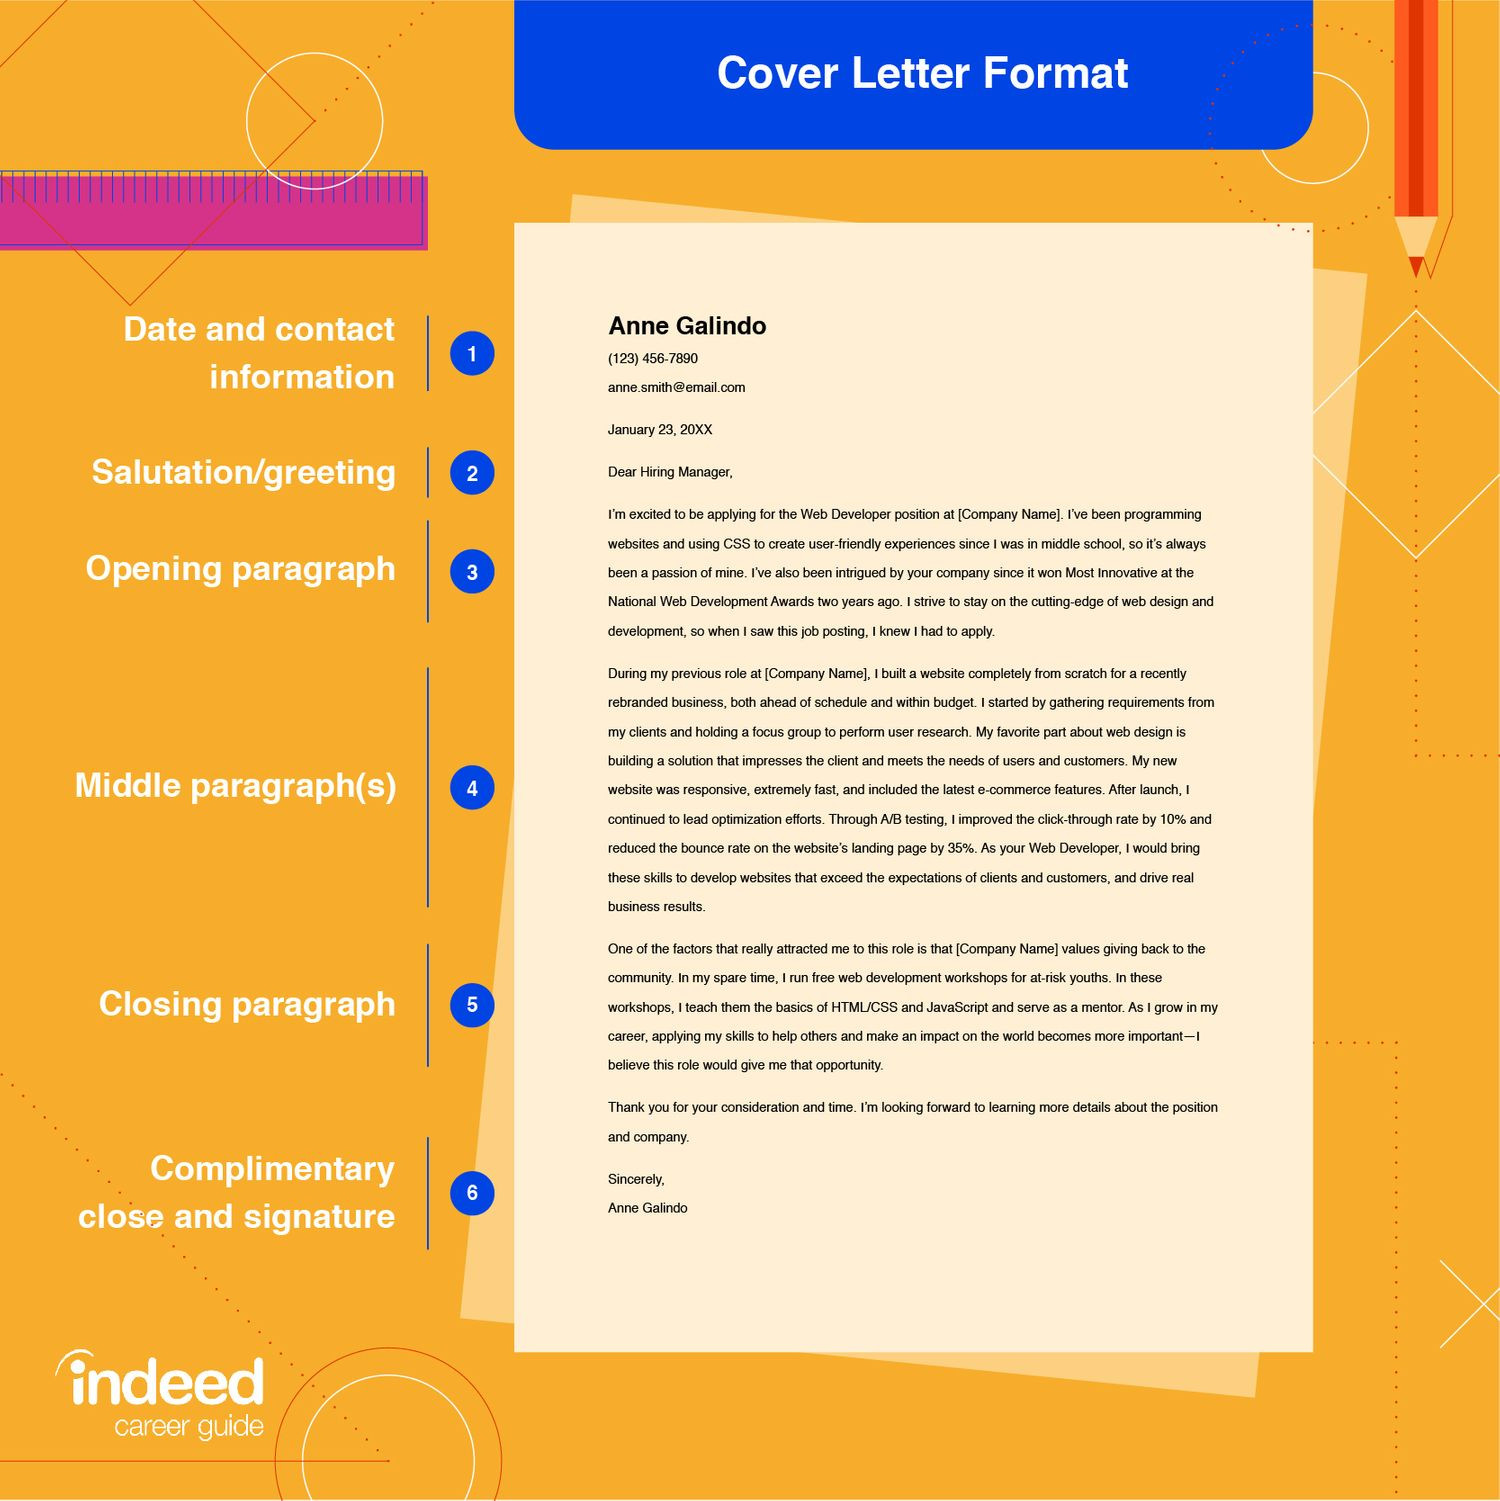 Email Cover Letter Samples for A Resume Submission How to Send An Email Cover Letter (with Example) Indeed.com